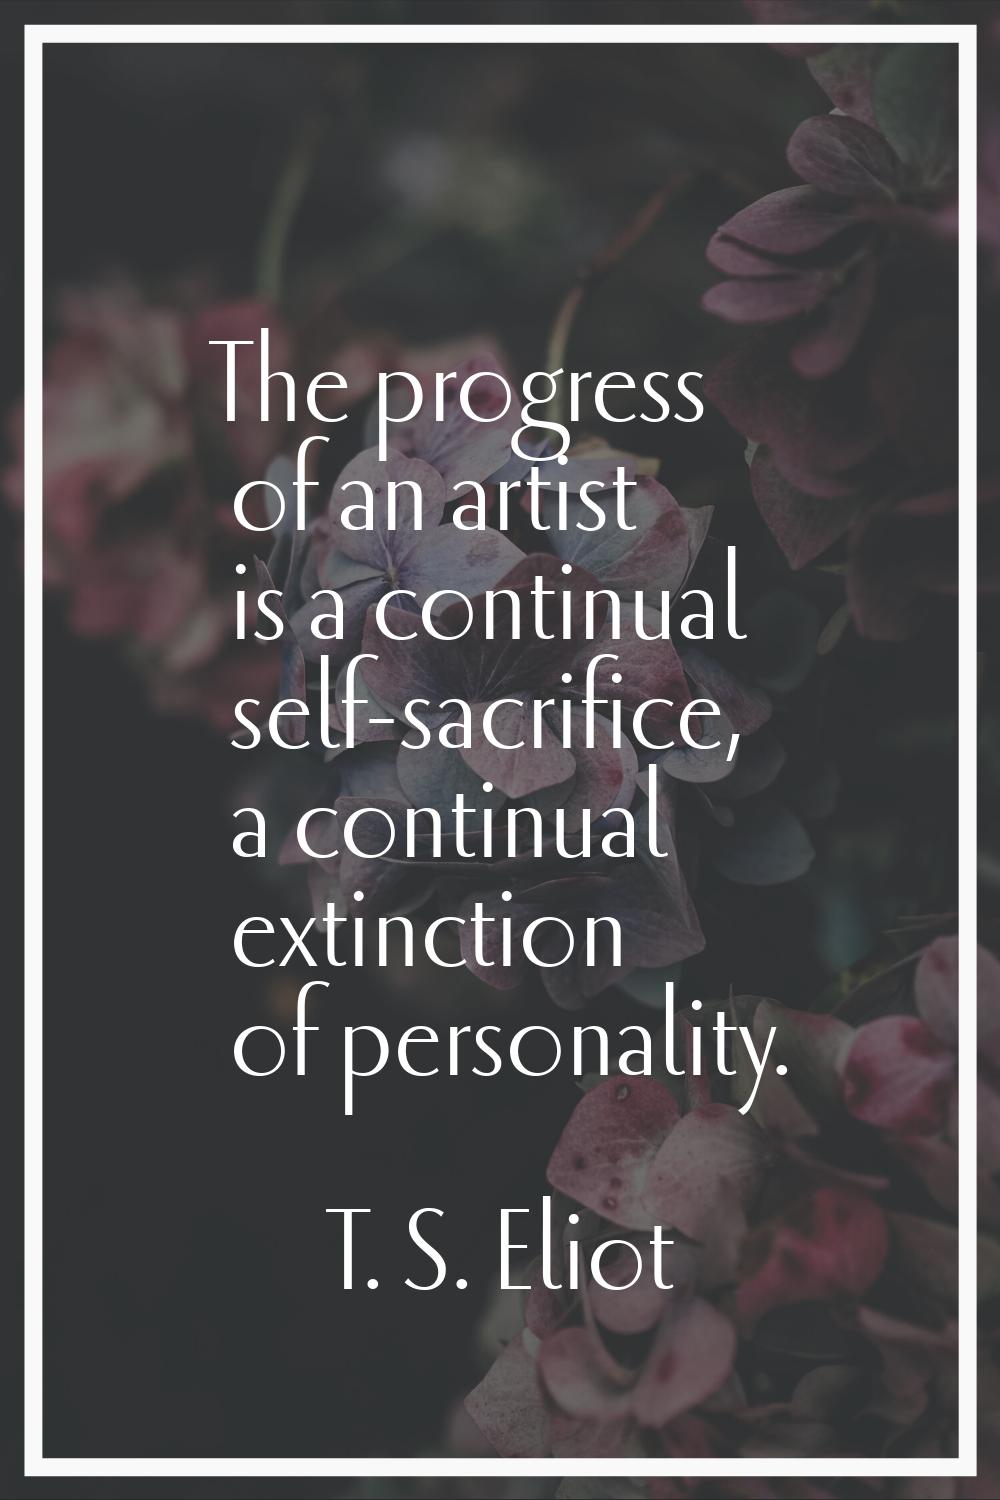 The progress of an artist is a continual self-sacrifice, a continual extinction of personality.